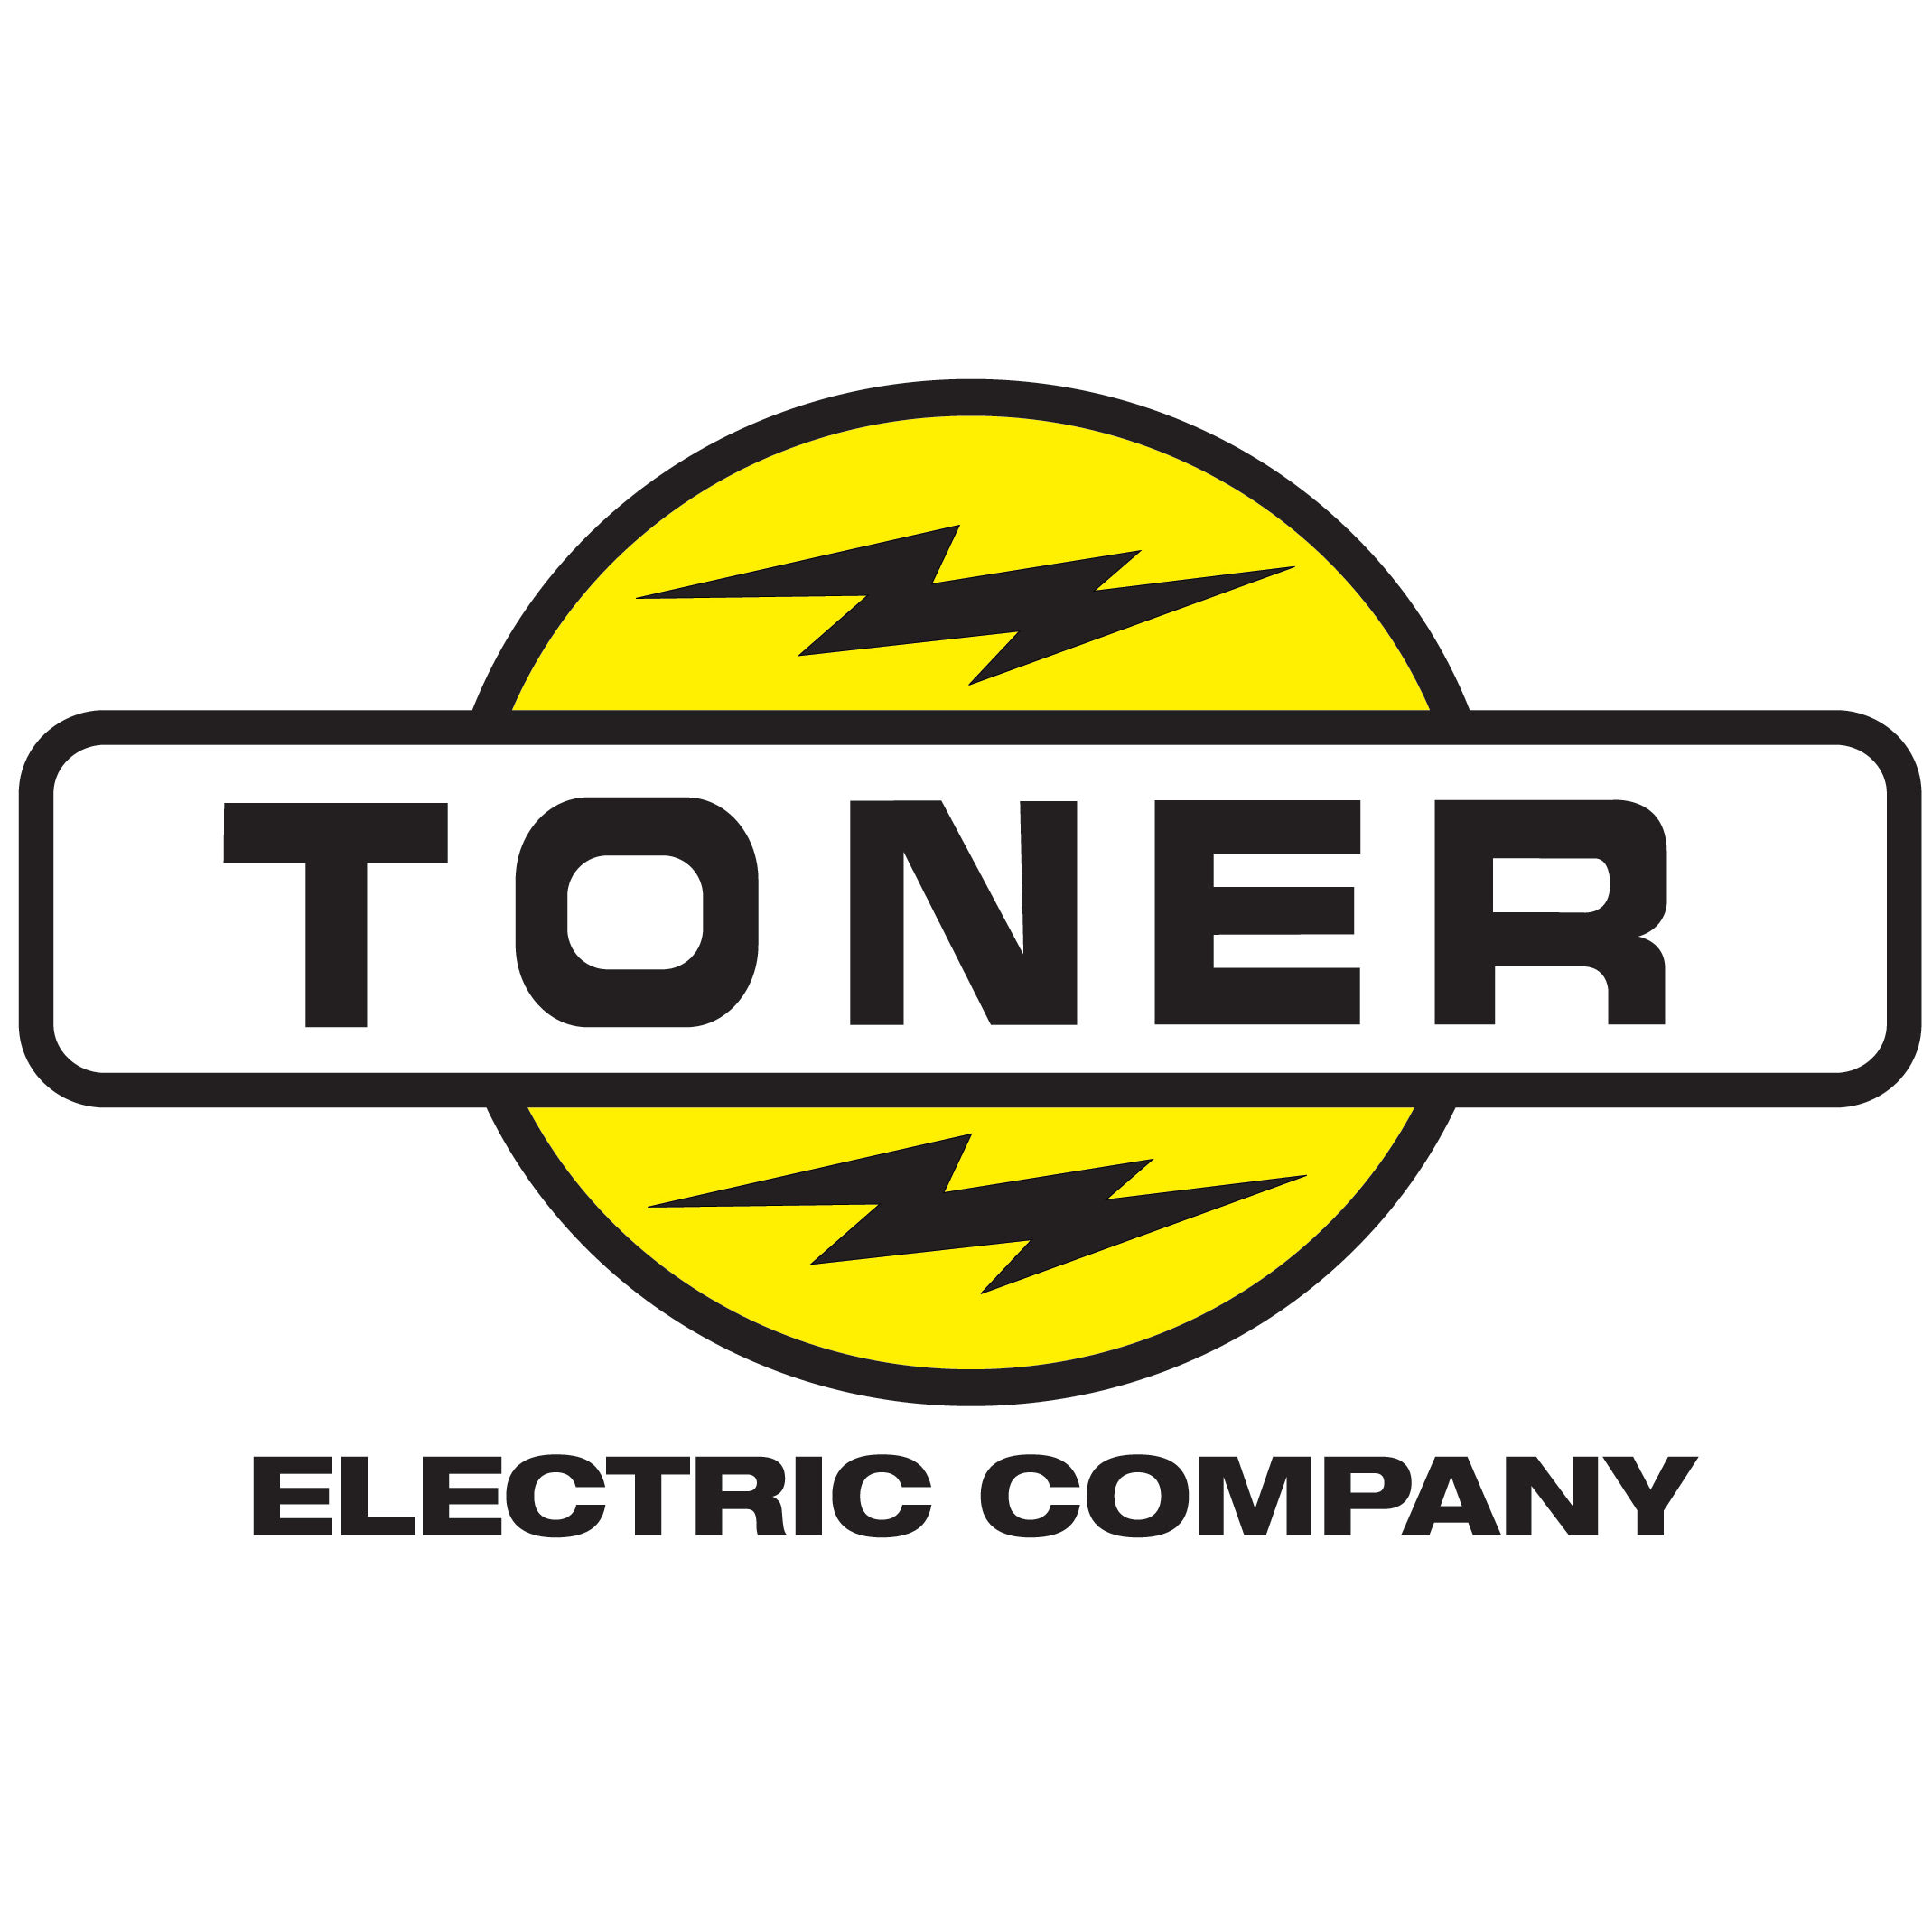 Toner Electric Company - Middletown, RI 02842 - (401)847-0993 | ShowMeLocal.com